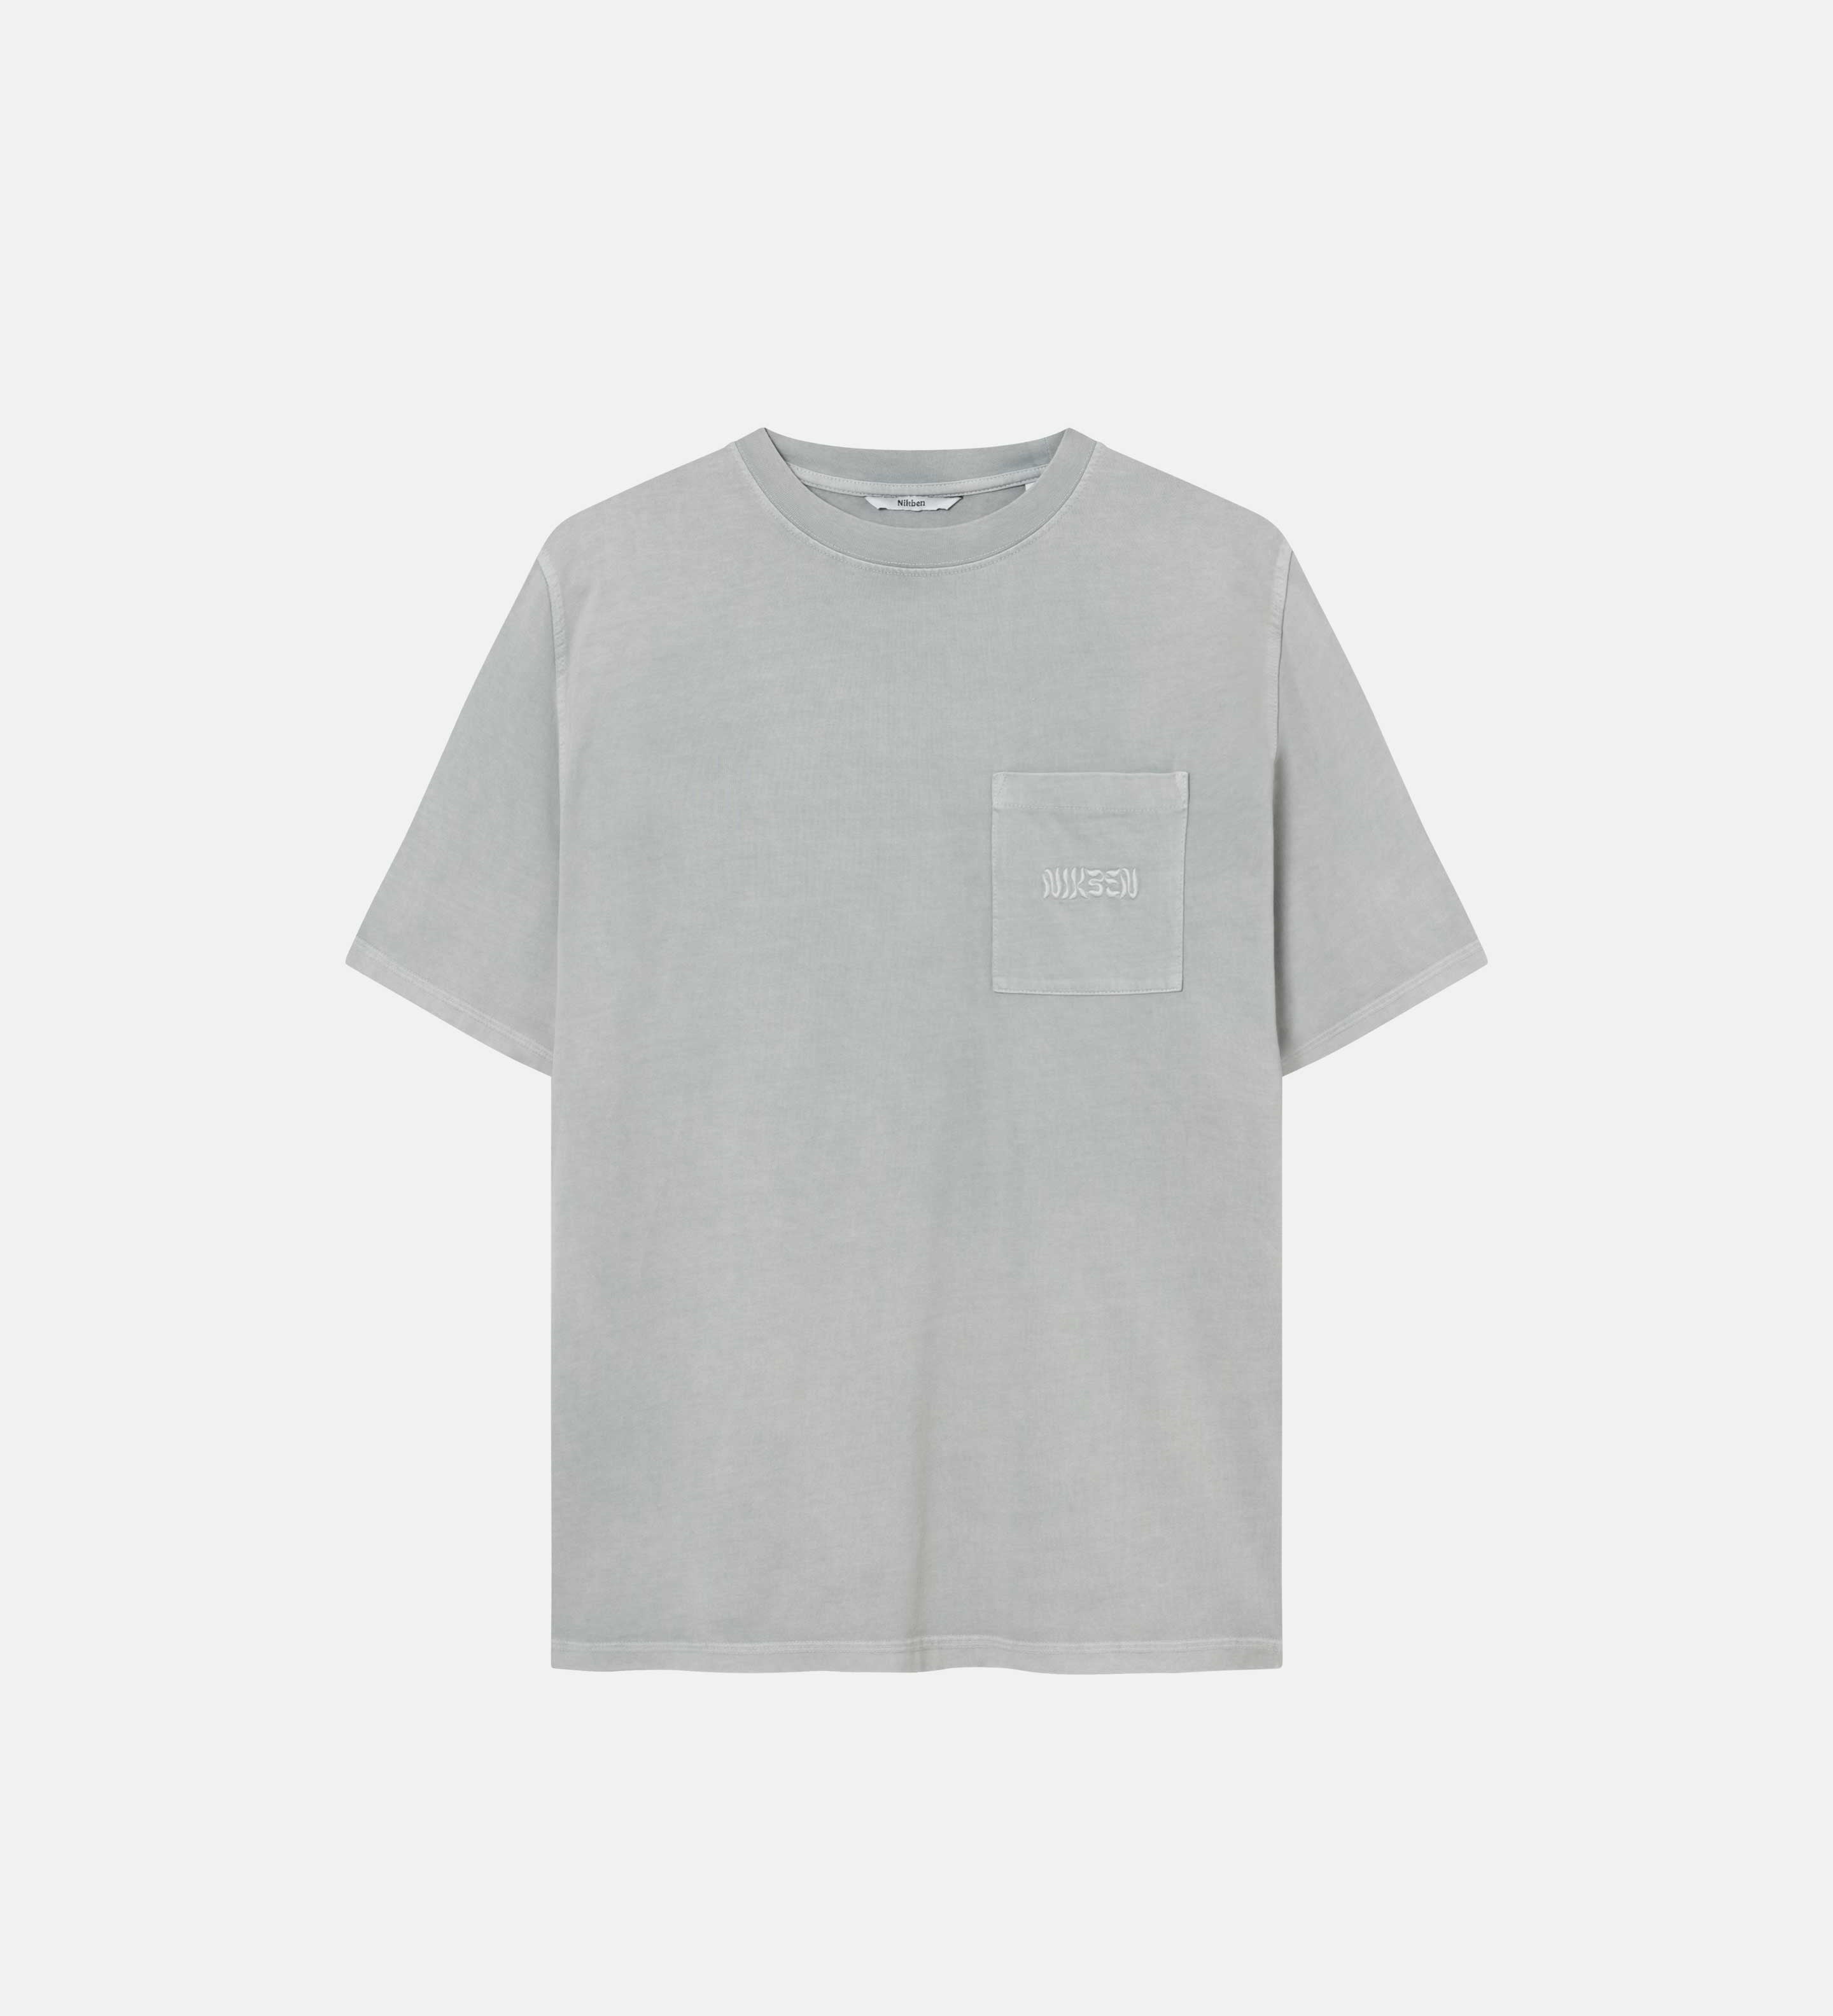 Washed grey t-shirt with breast pocket and embroidered logo.